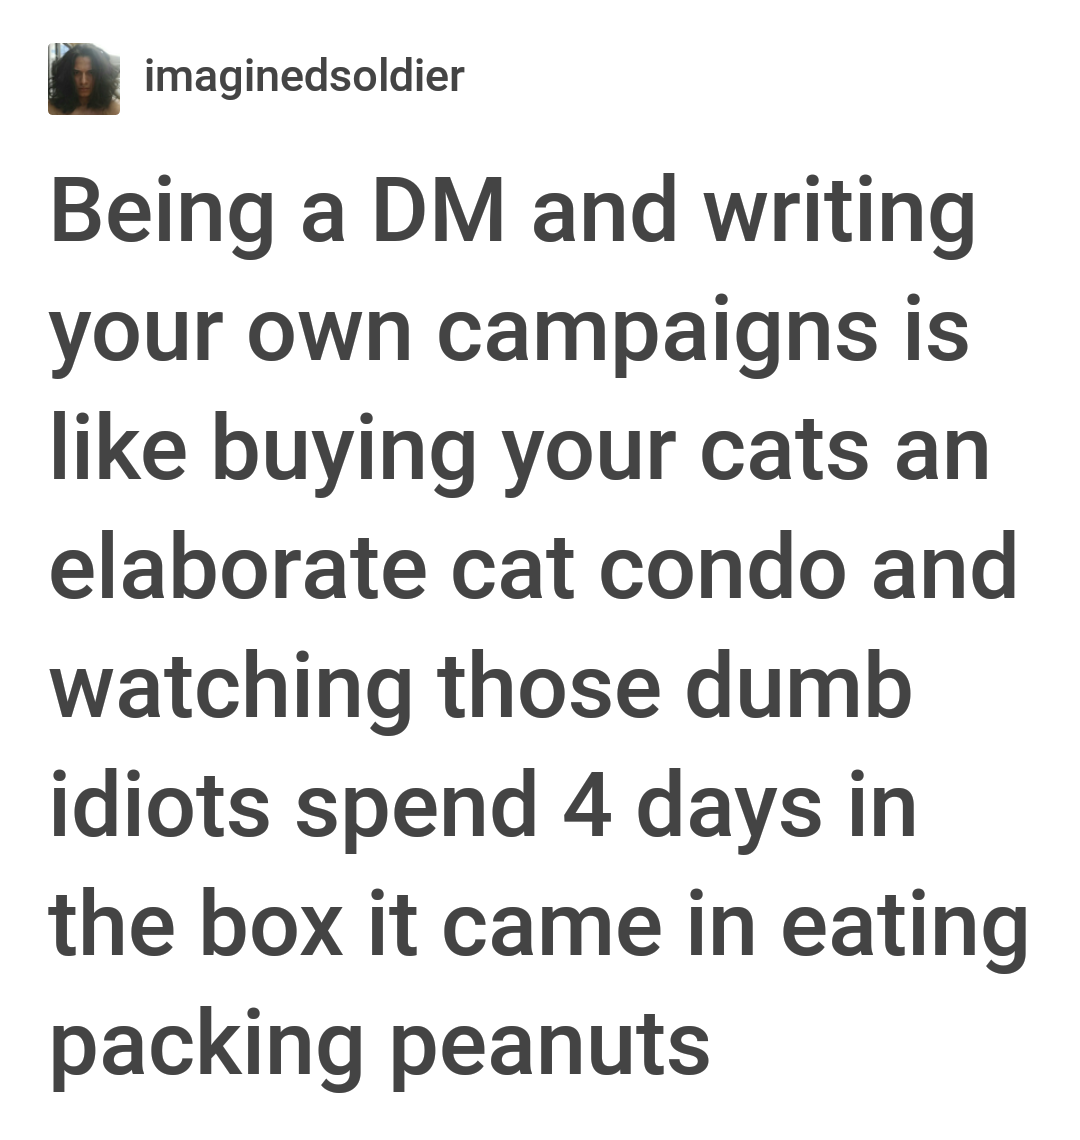 ami bhareli nazru rakho jain stavan - imaginedsoldier Being a Dm and writing your own campaigns is buying your cats an elaborate cat condo and watching those dumb idiots spend 4 days in the box it came in eating packing peanuts